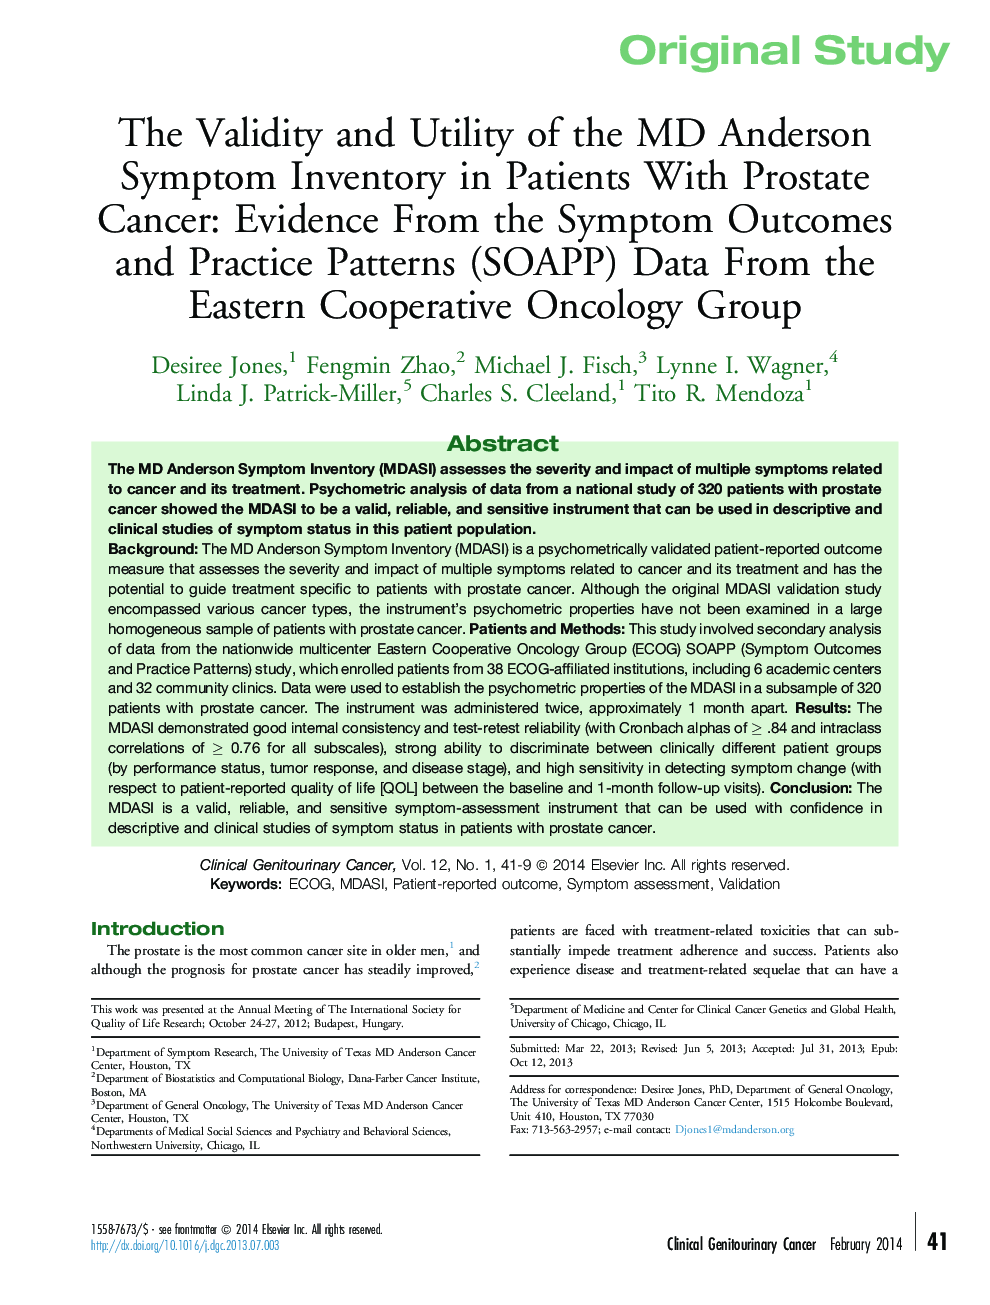 The Validity and Utility of the MD Anderson Symptom Inventory in Patients With Prostate Cancer: Evidence From the Symptom Outcomes and Practice Patterns (SOAPP) Data From the Eastern Cooperative Oncology Group